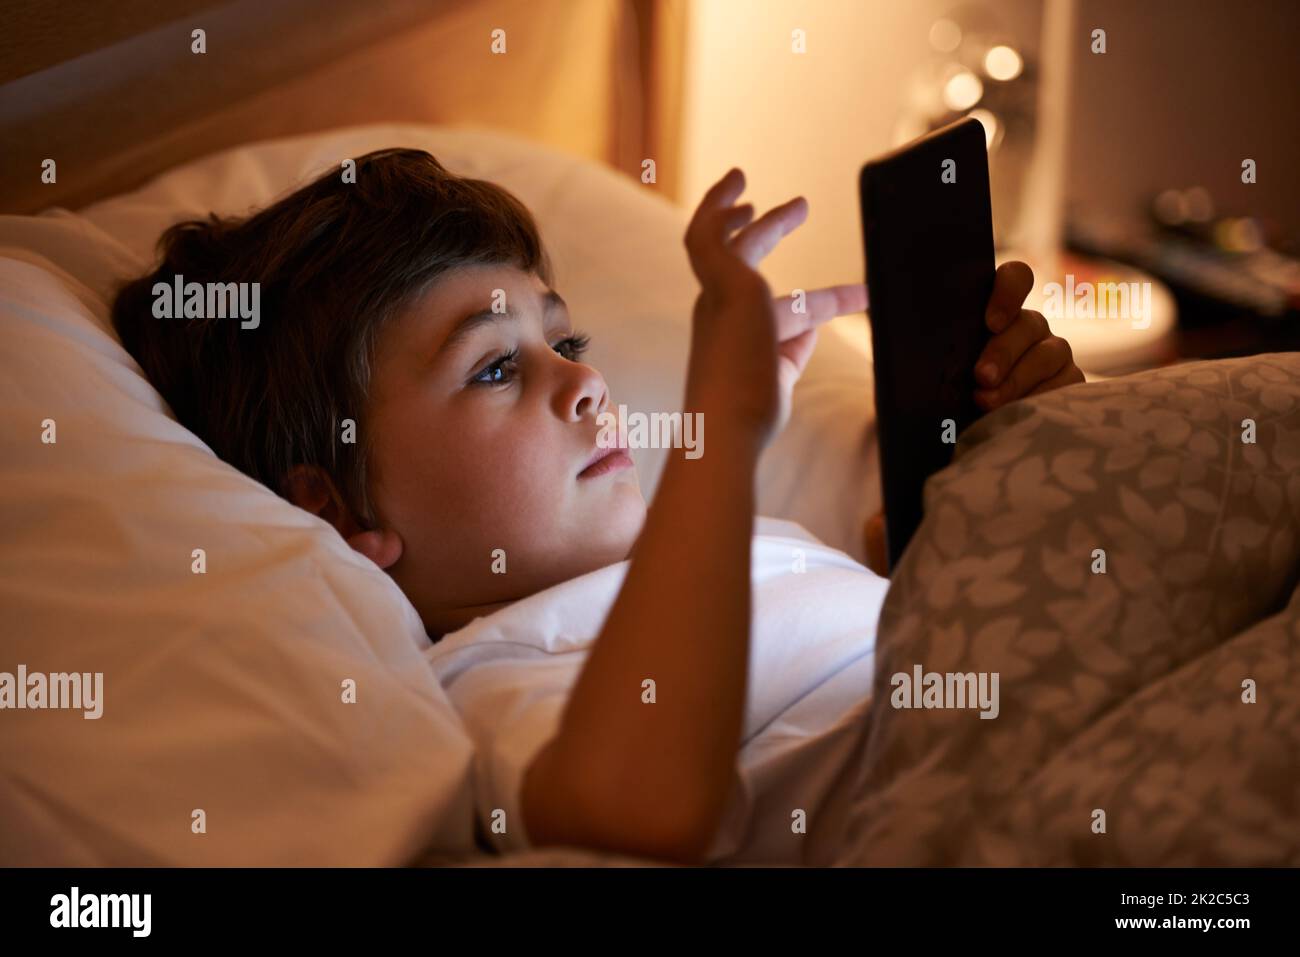 Some light reading before bed. Shot of a young boy playing on a tablet while lying in bed. Stock Photo